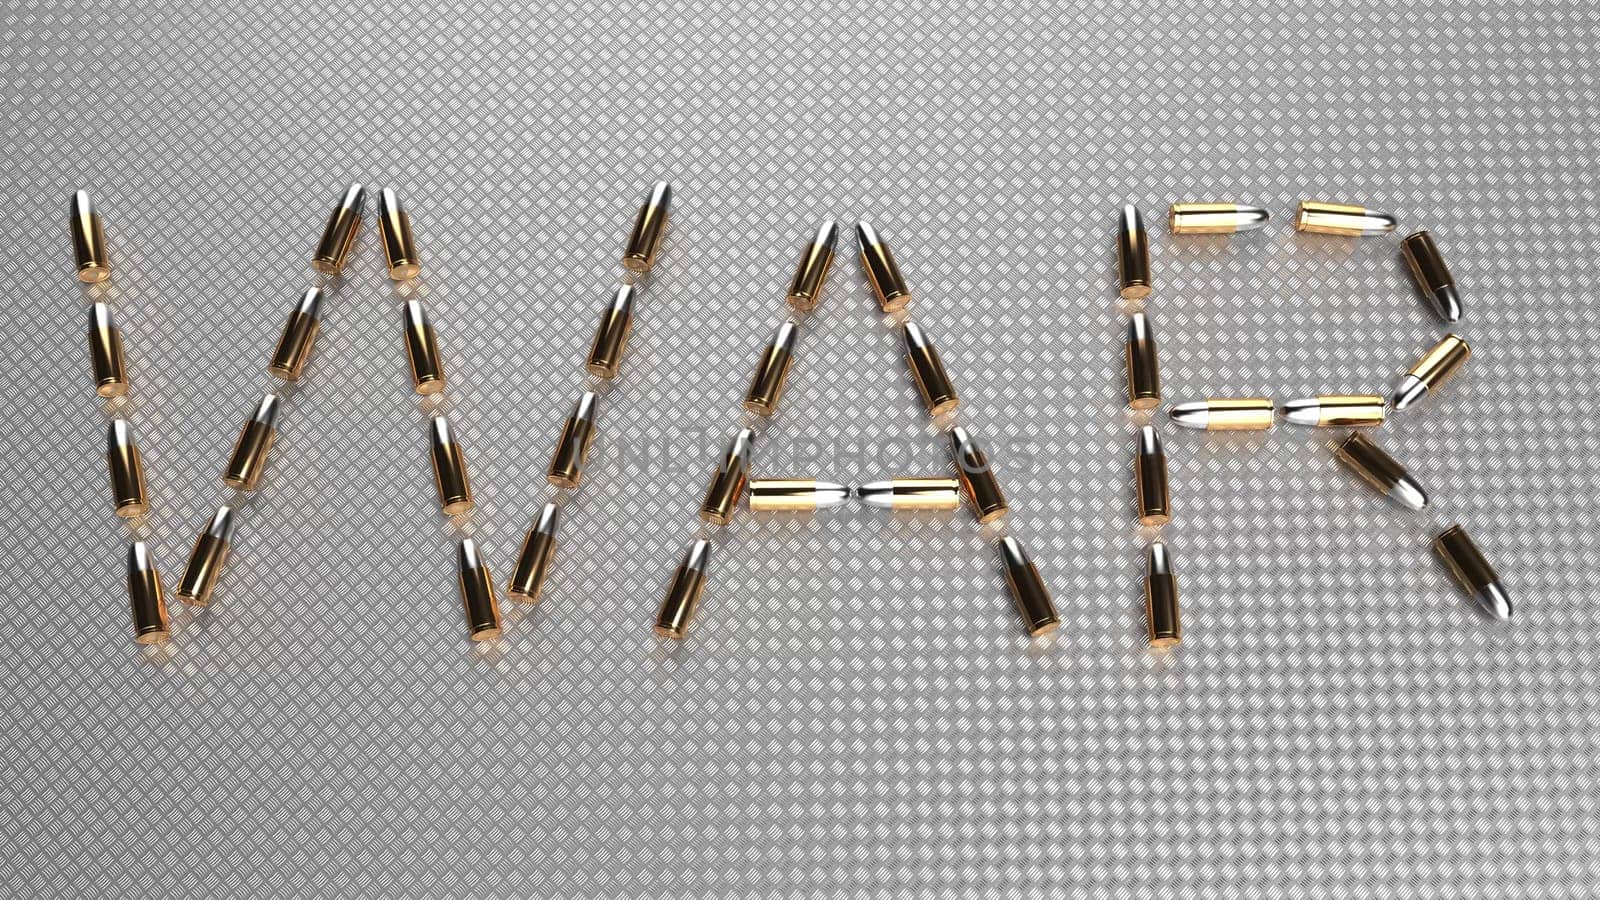 Bullets are laid out in the word WAR on an iron surface 3d render